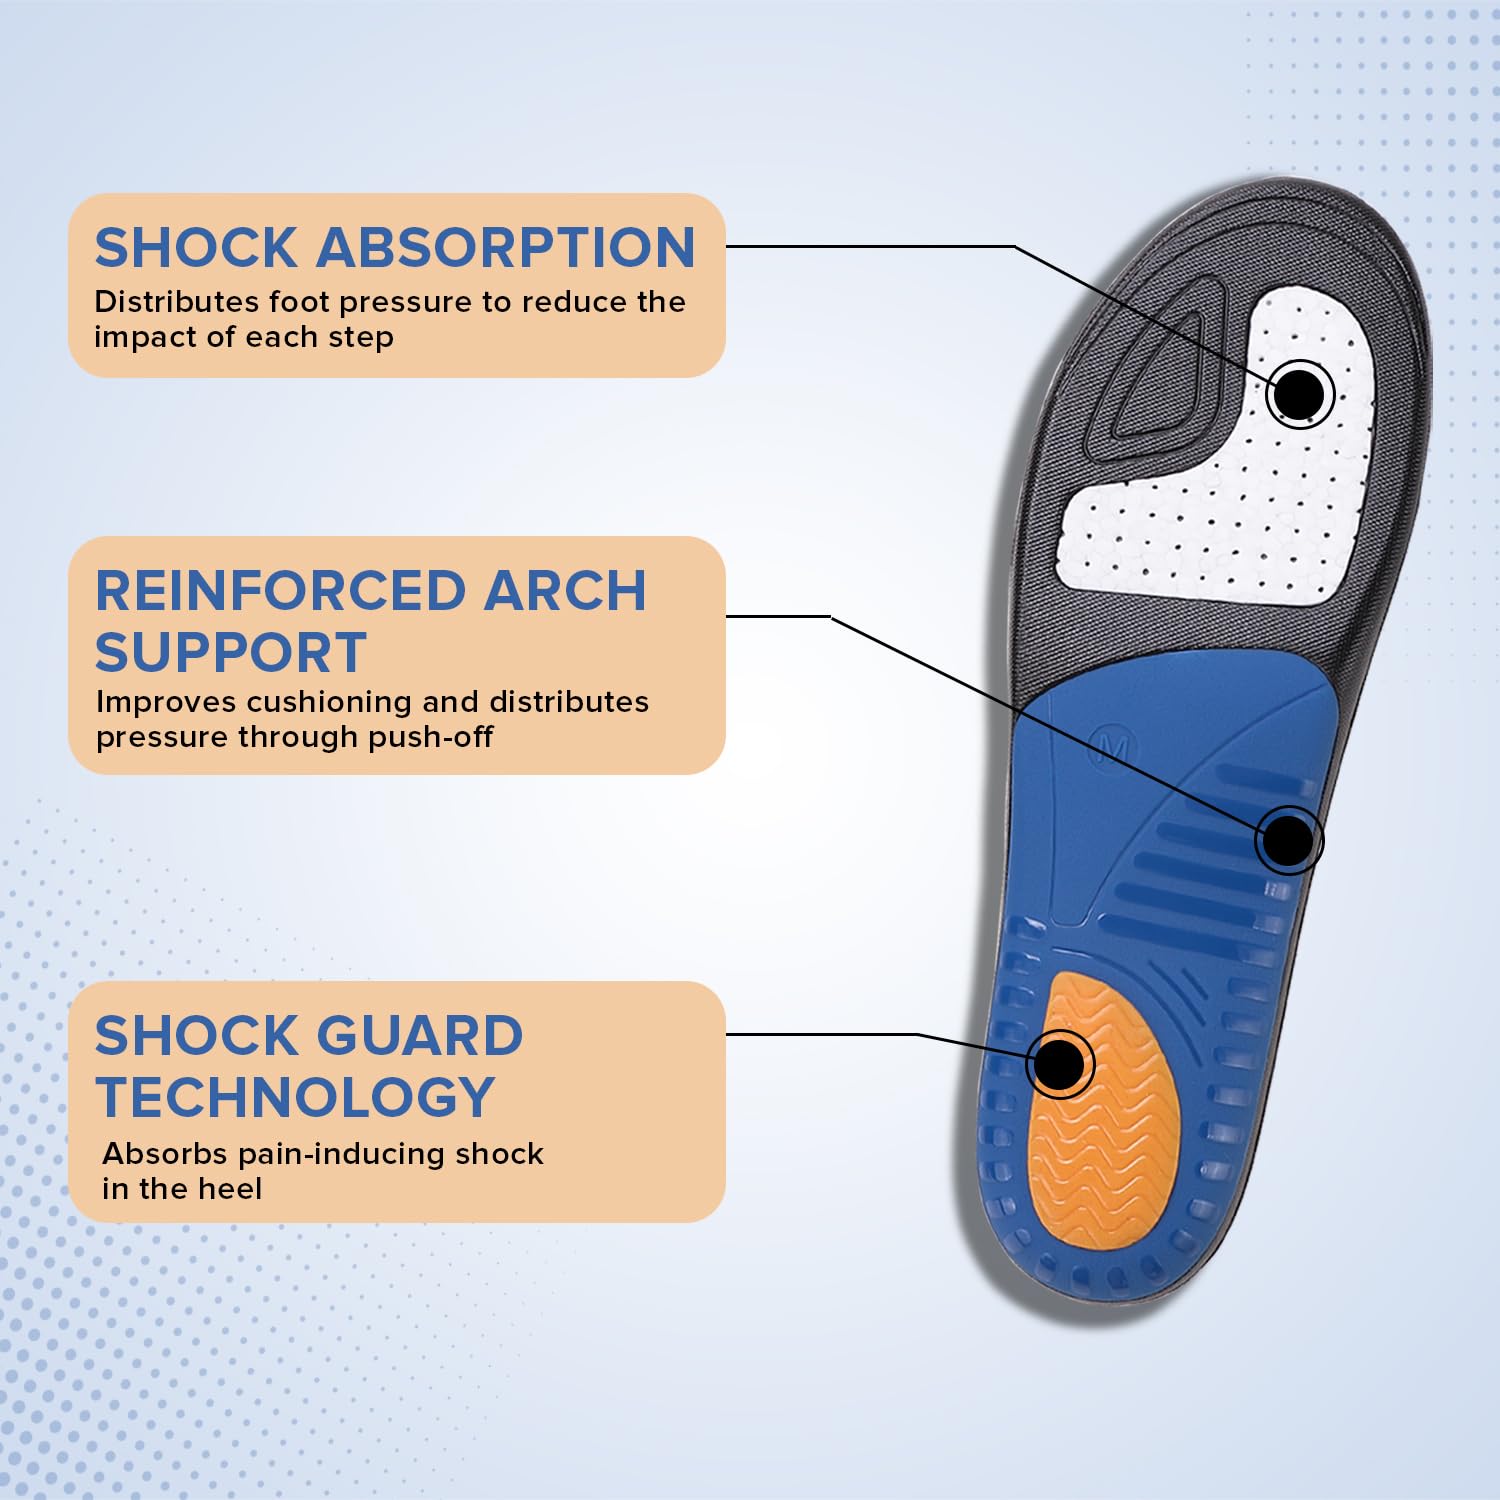 Dr Foot Running Insoles | For Running, Walking, Sport Activities | Optimal Support and Comfort for Runners | Breathable and Comfortable For Enhanced Performance | For Men & Women - 1 Pair (Large Size)